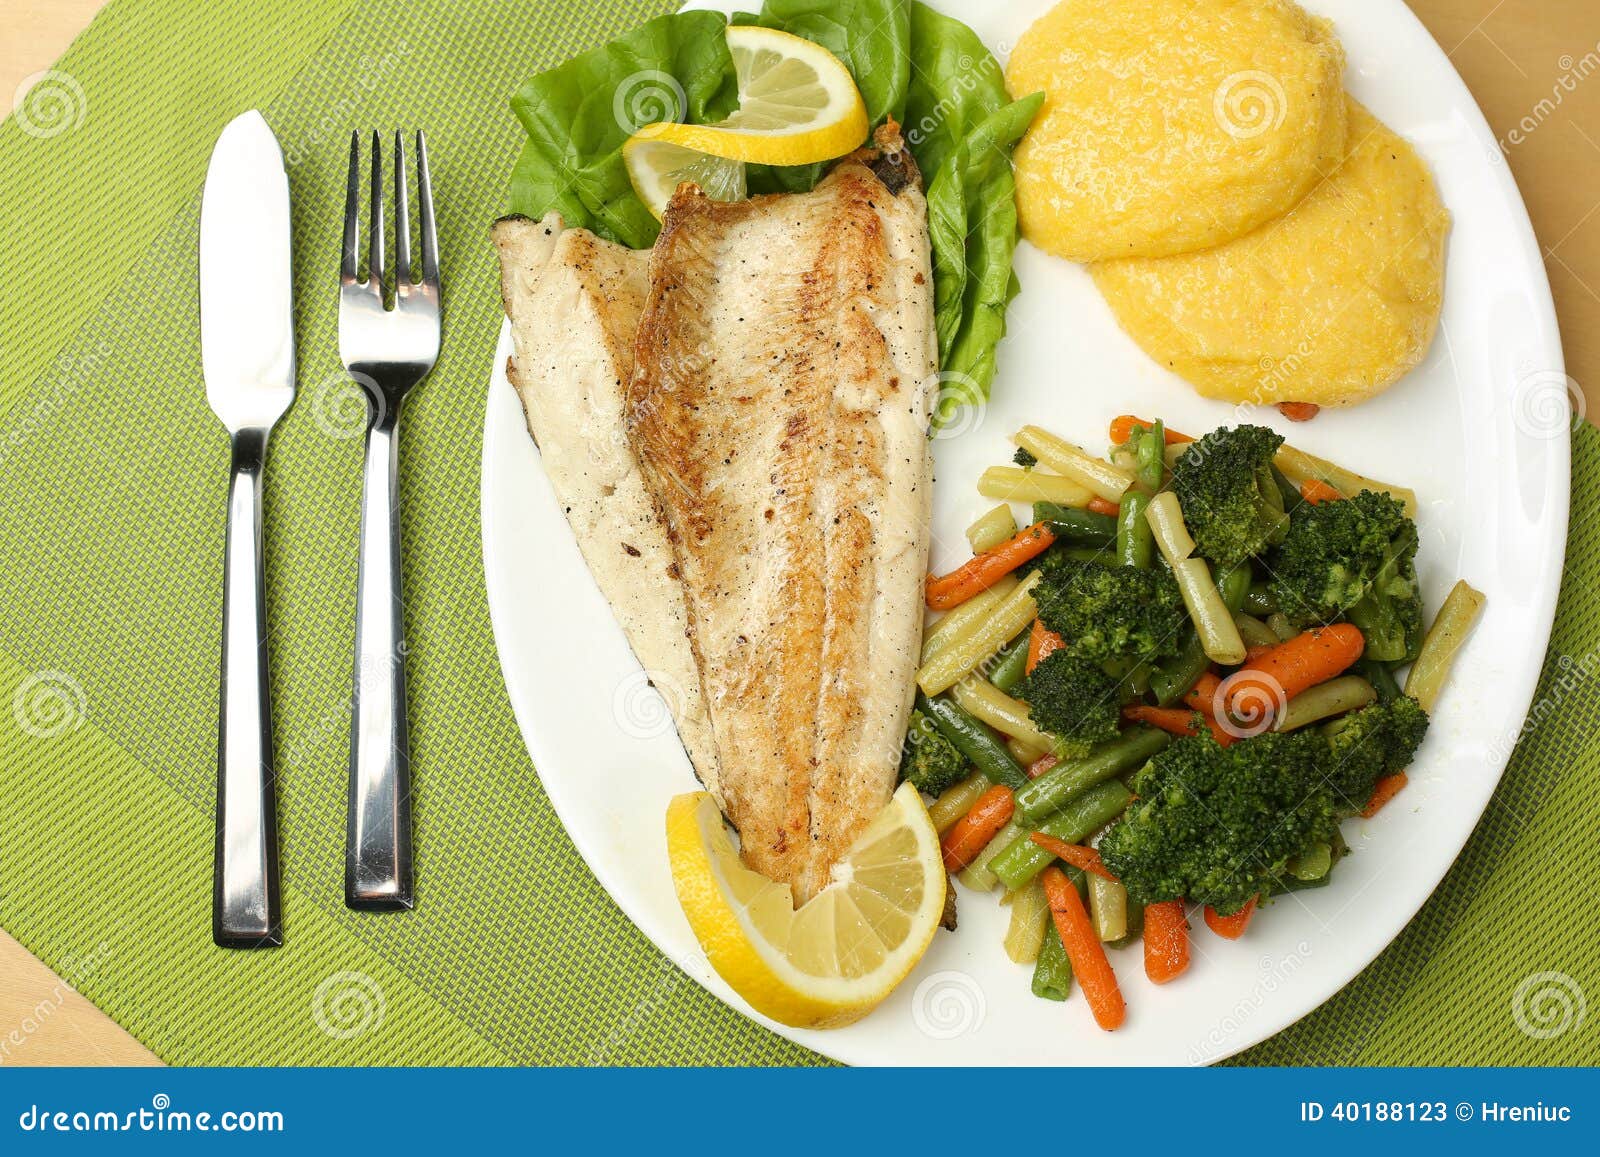 Tasty Fish with Lemon and Vegetables Stock Image - Image of green, fish ...